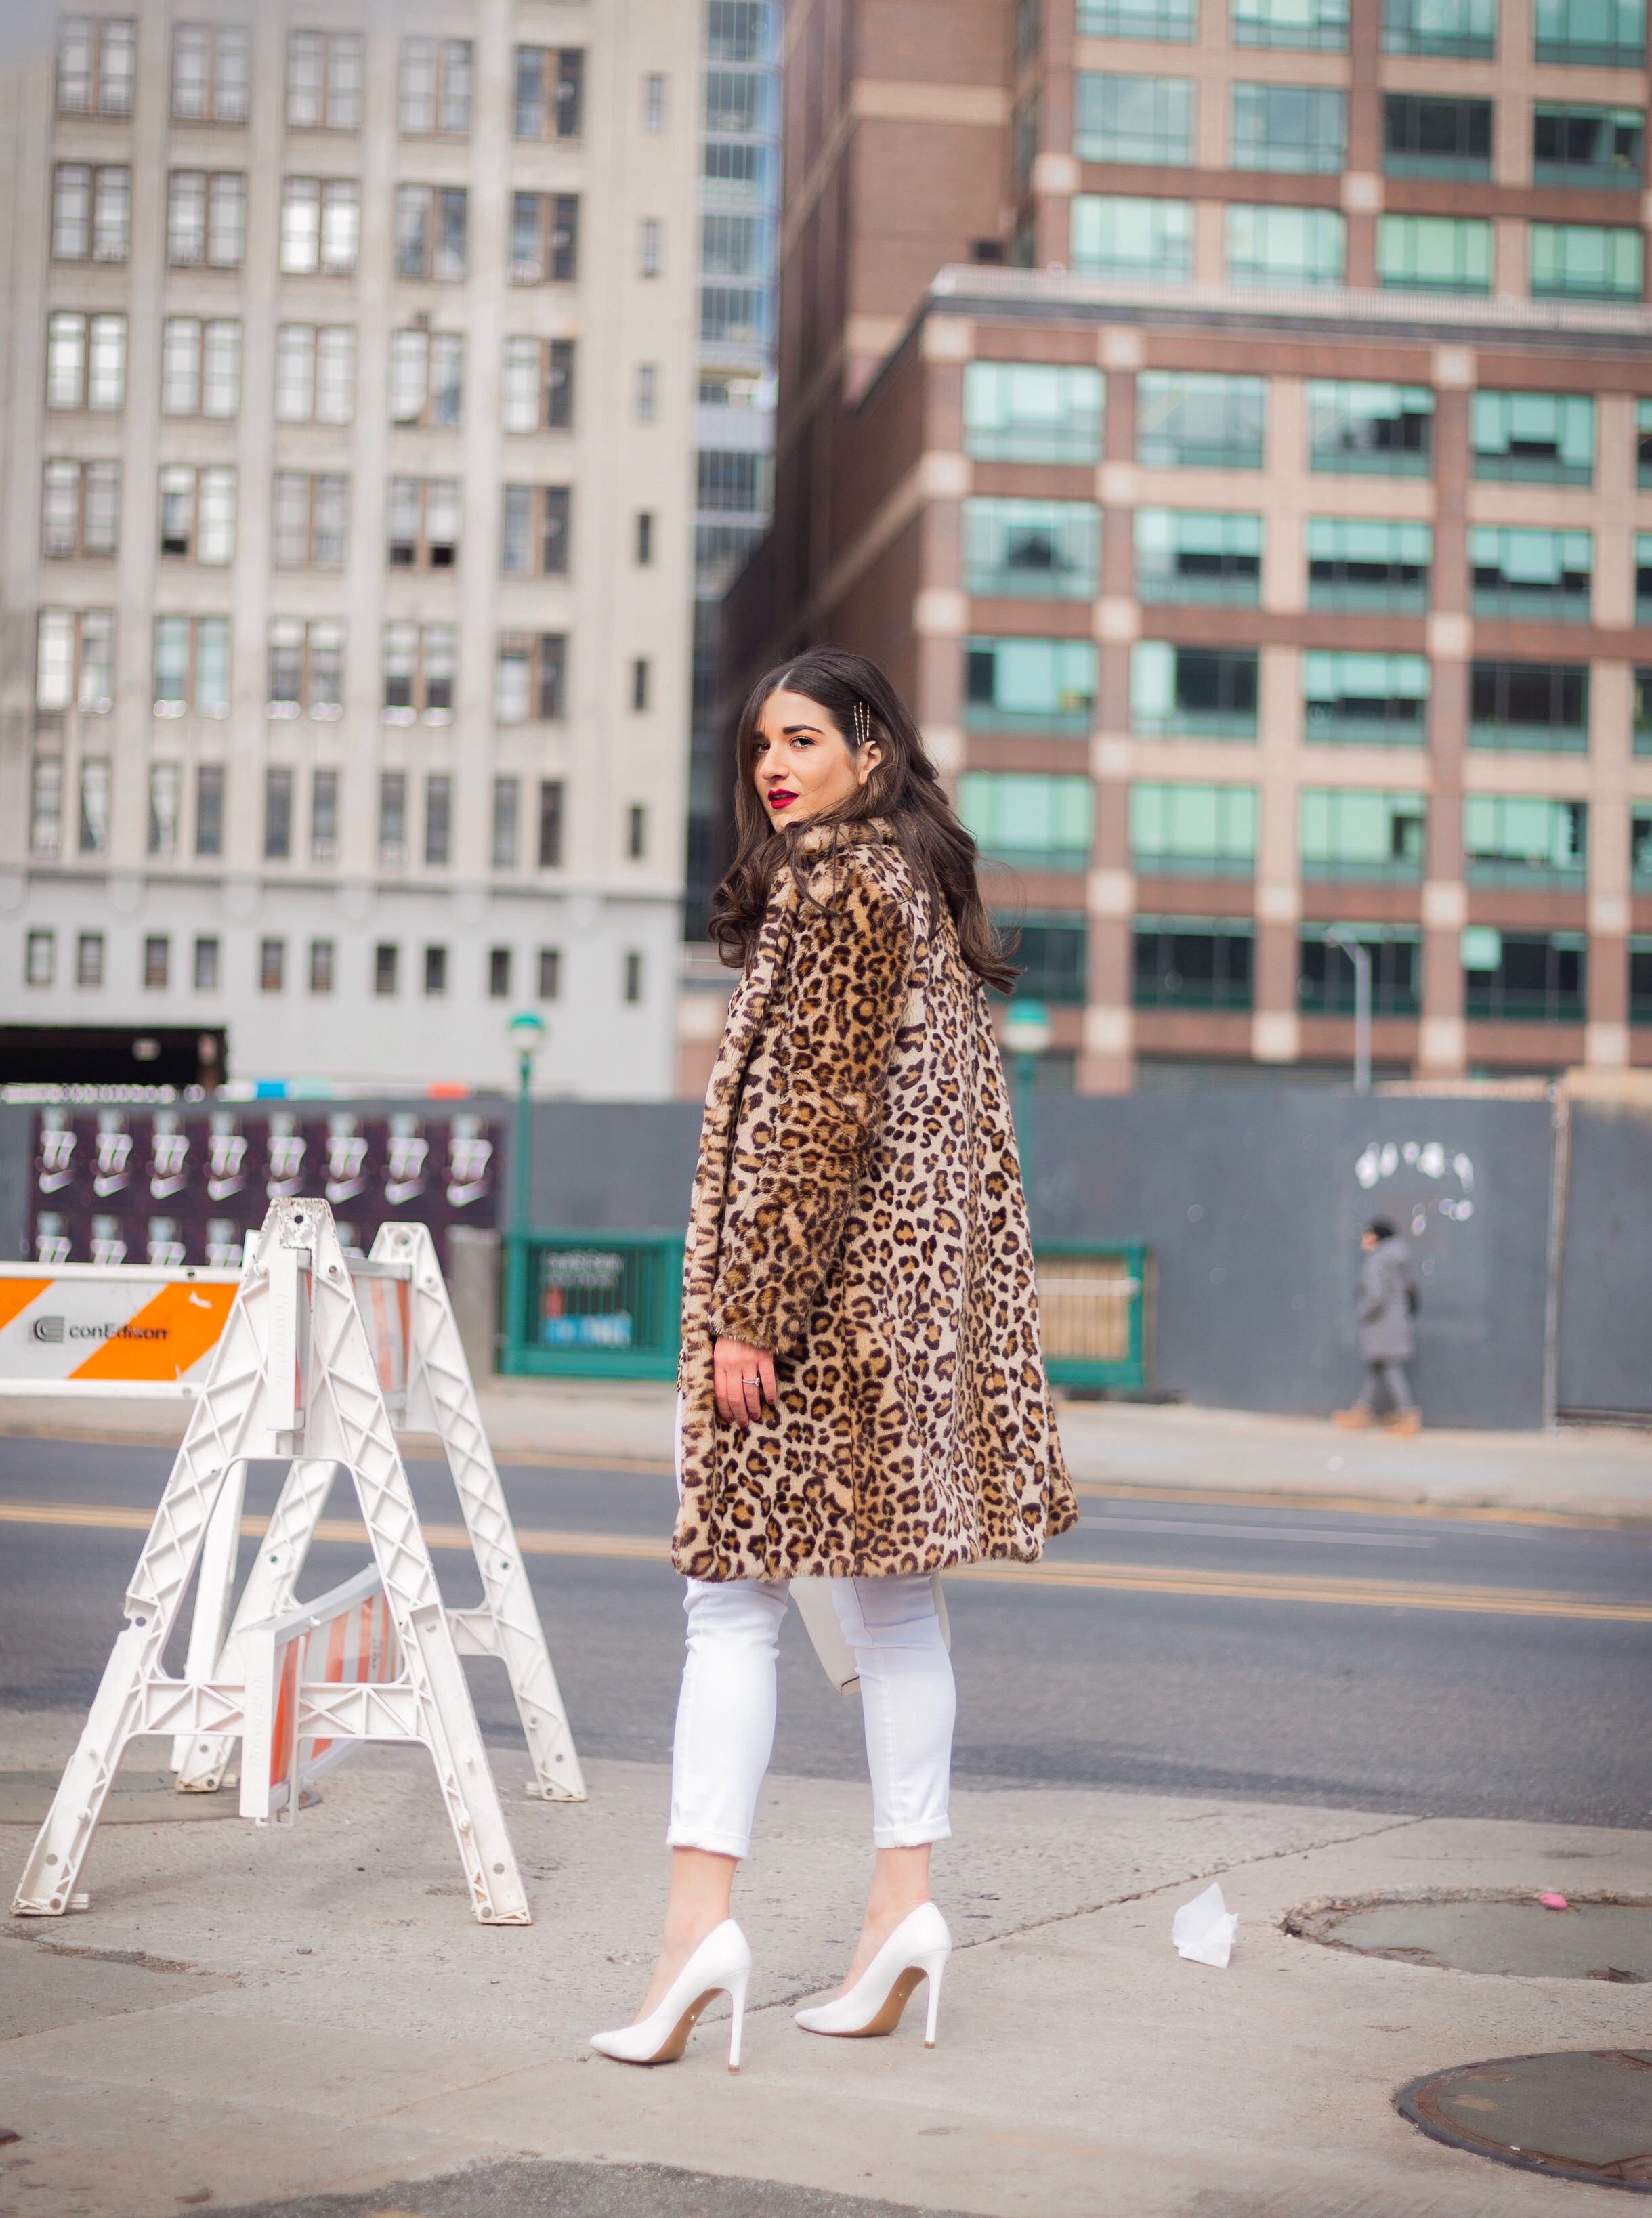 Dressing Up My Democracy Denim Esther Santer Fashion Blog NYC Street Style Blogger Outfit OOTD Trendy Shopping White Jeans Leopard Top Coat Inspo Bobby Pins Hair Trend White Heels Chaya Ross Photography Gold Belt Cream Chain Small Bag Wear Inspiration.jpg